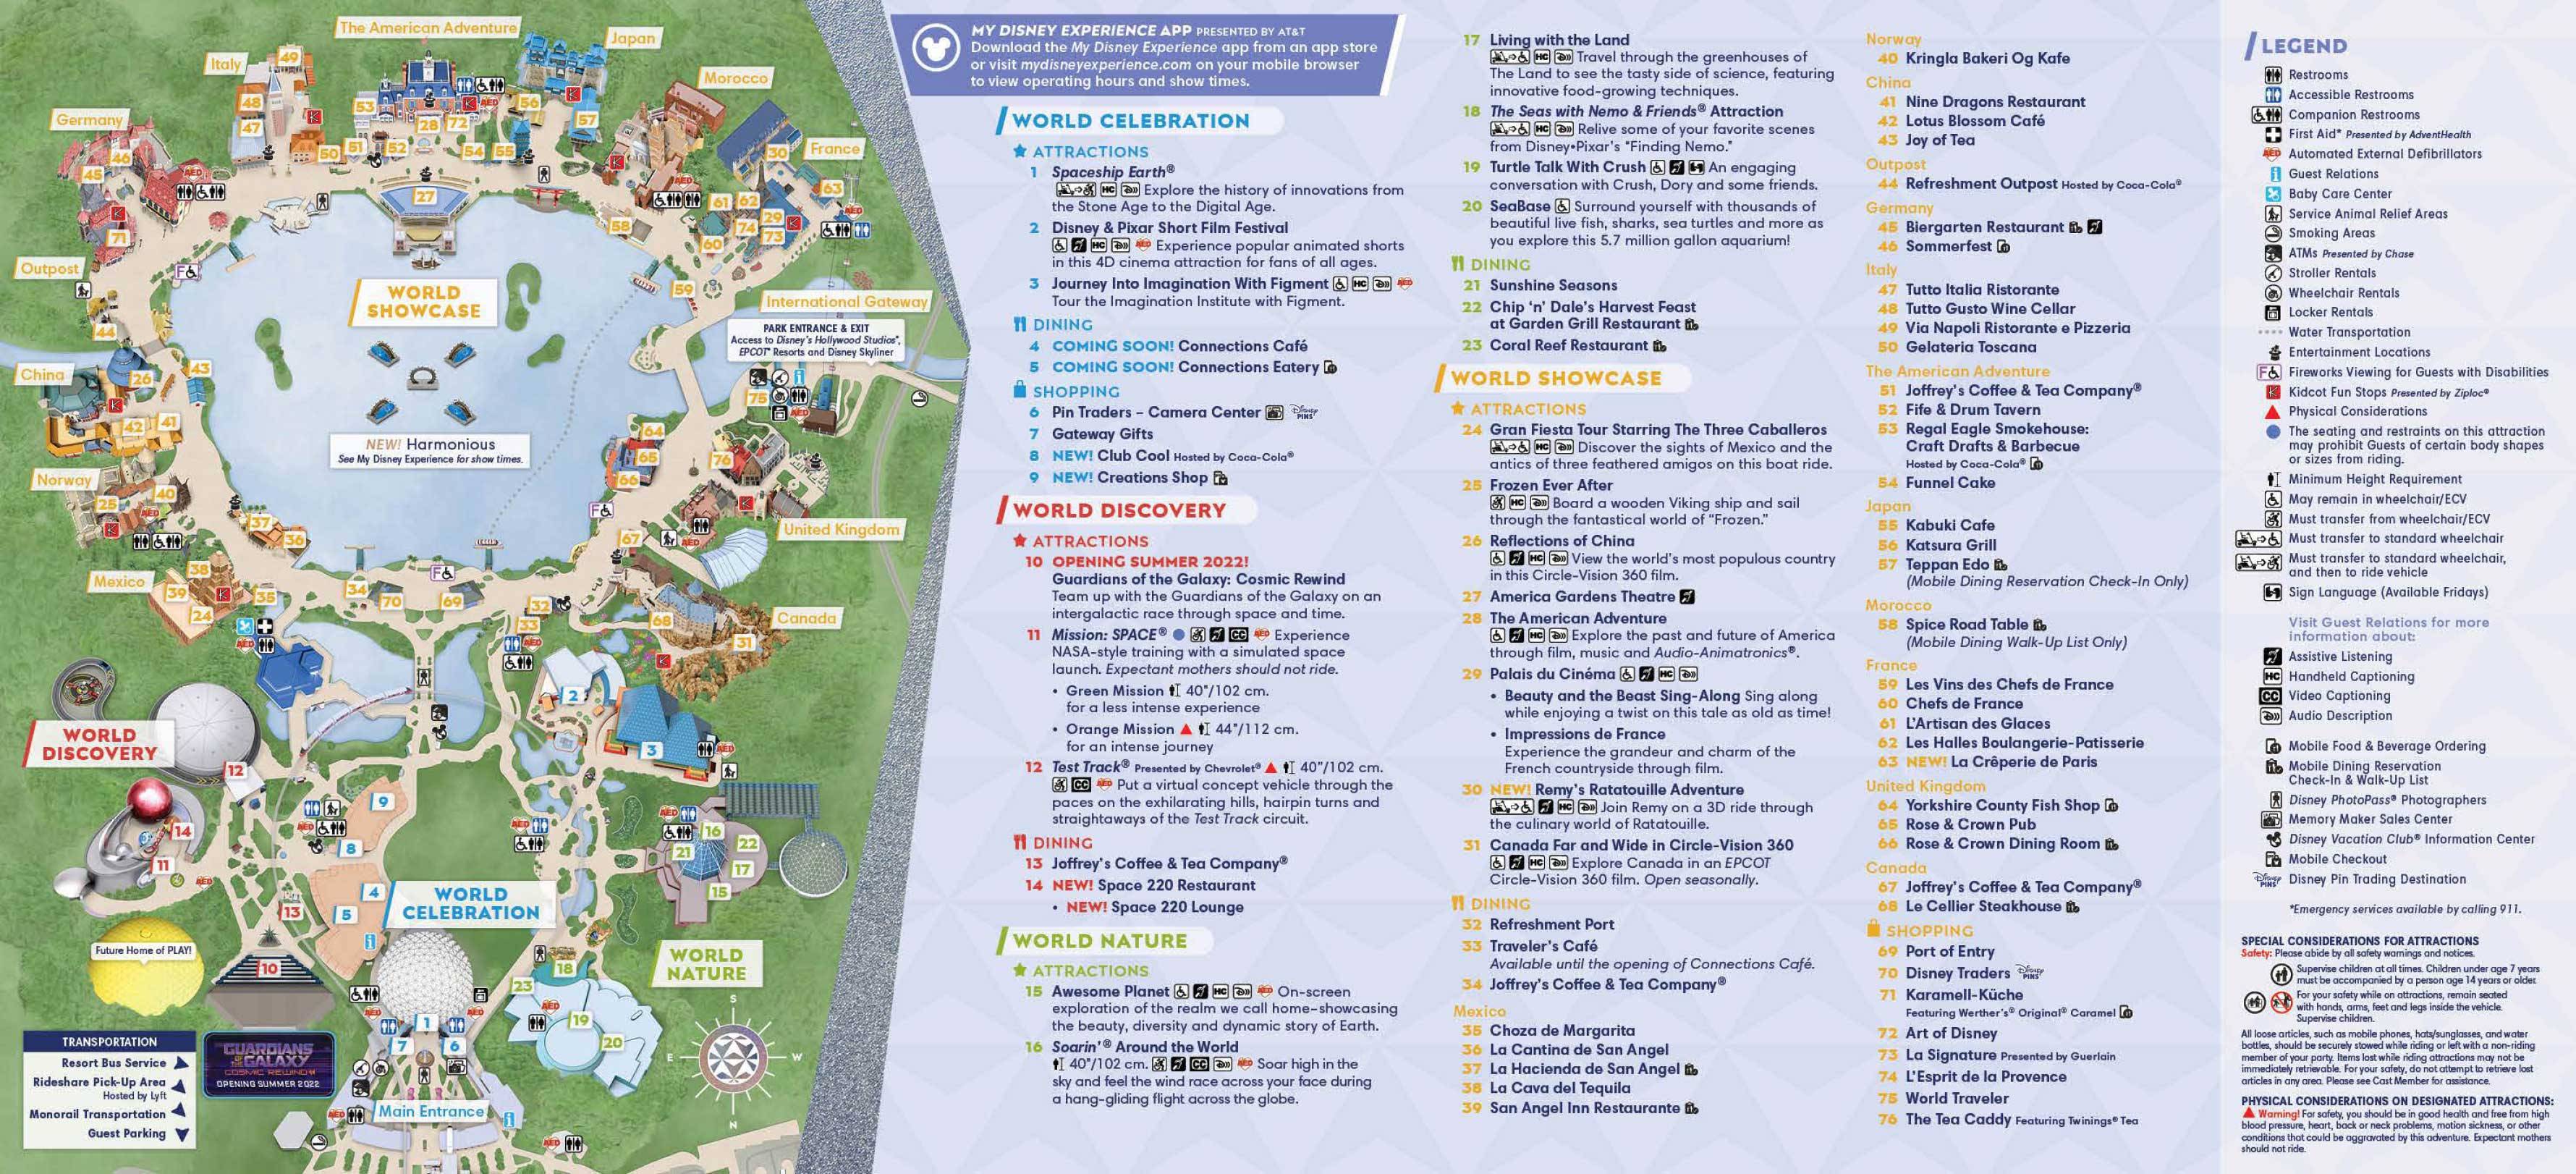 New guide map for EPCOT includes changes to walkways, closure of the EPCOT Experience, and upcoming World Celebration dining 